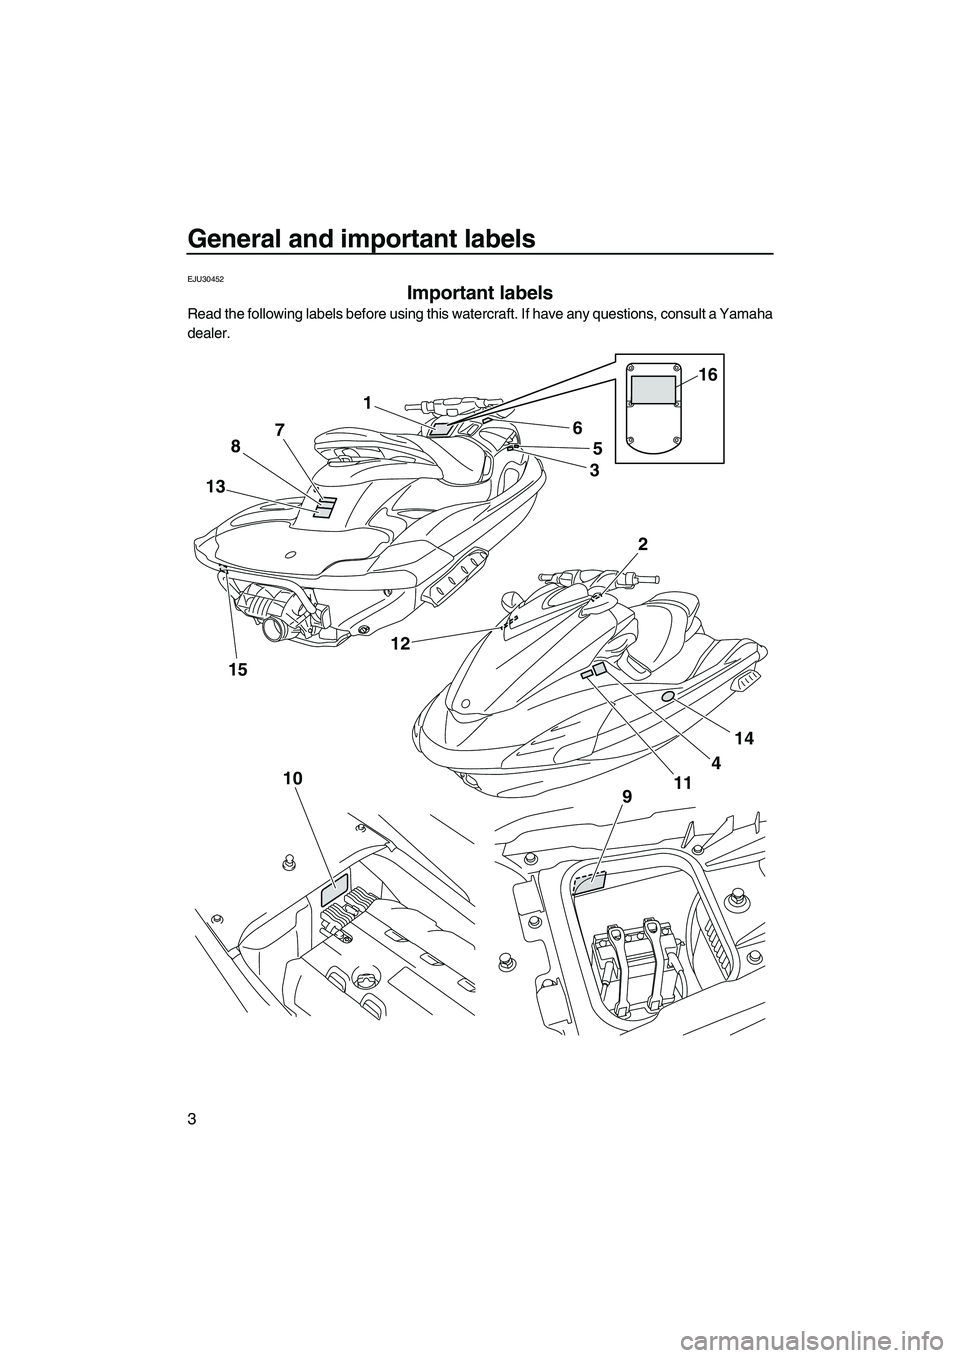 YAMAHA FZS SVHO 2010  Owners Manual General and important labels
3
EJU30452
Important labels 
Read the following labels before using this watercraft. If have any questions, consult a Yamaha
dealer.
1
5
3
4
11 6
87
13
1512
14
2
9 10
16
U